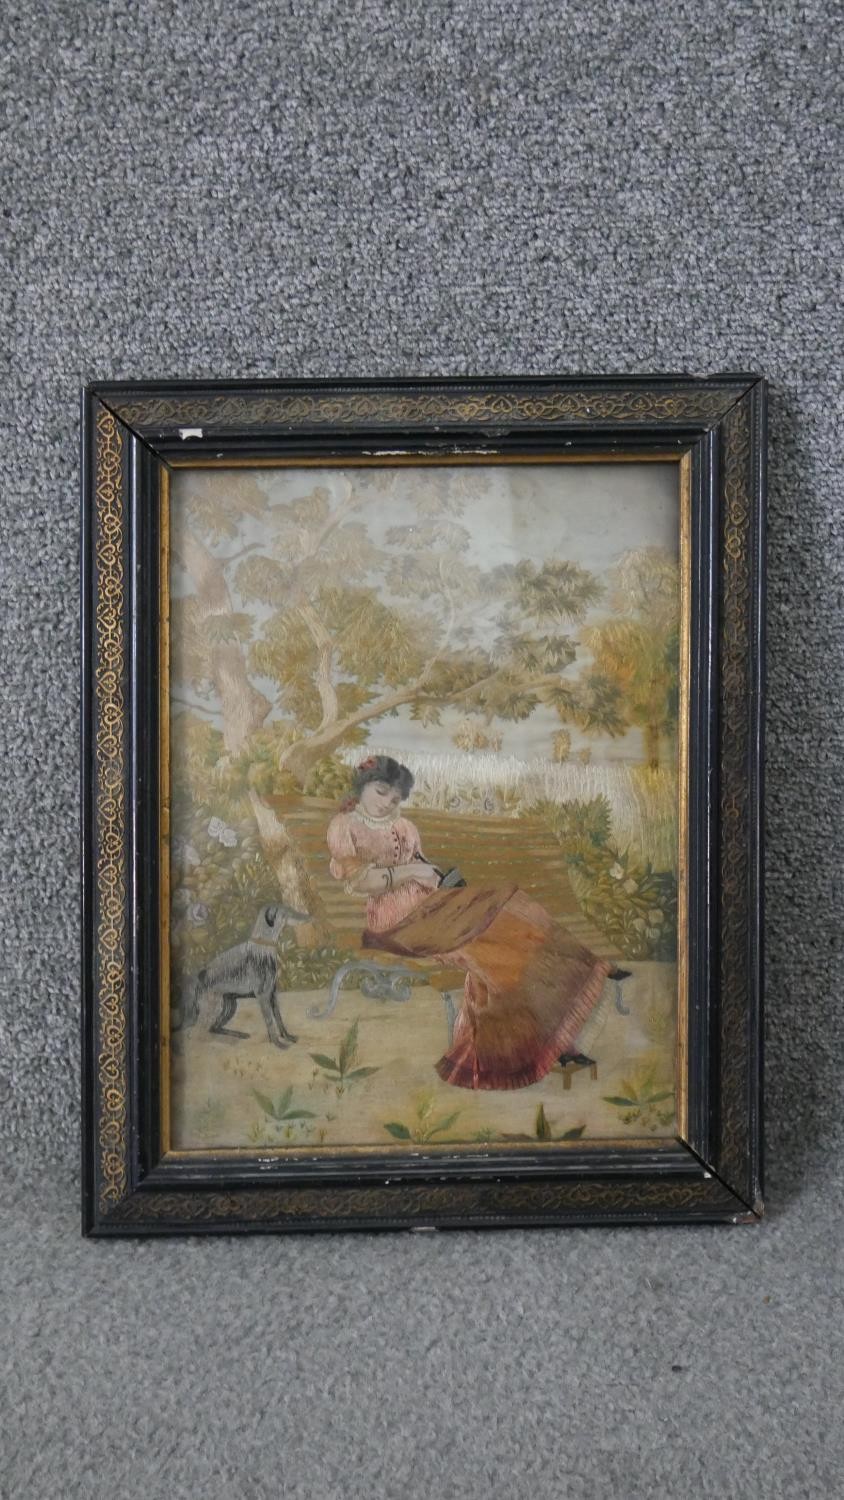 A framed and glazed 19th century Italian silk work embroidery of a lady sitting on a bench with - Image 2 of 4